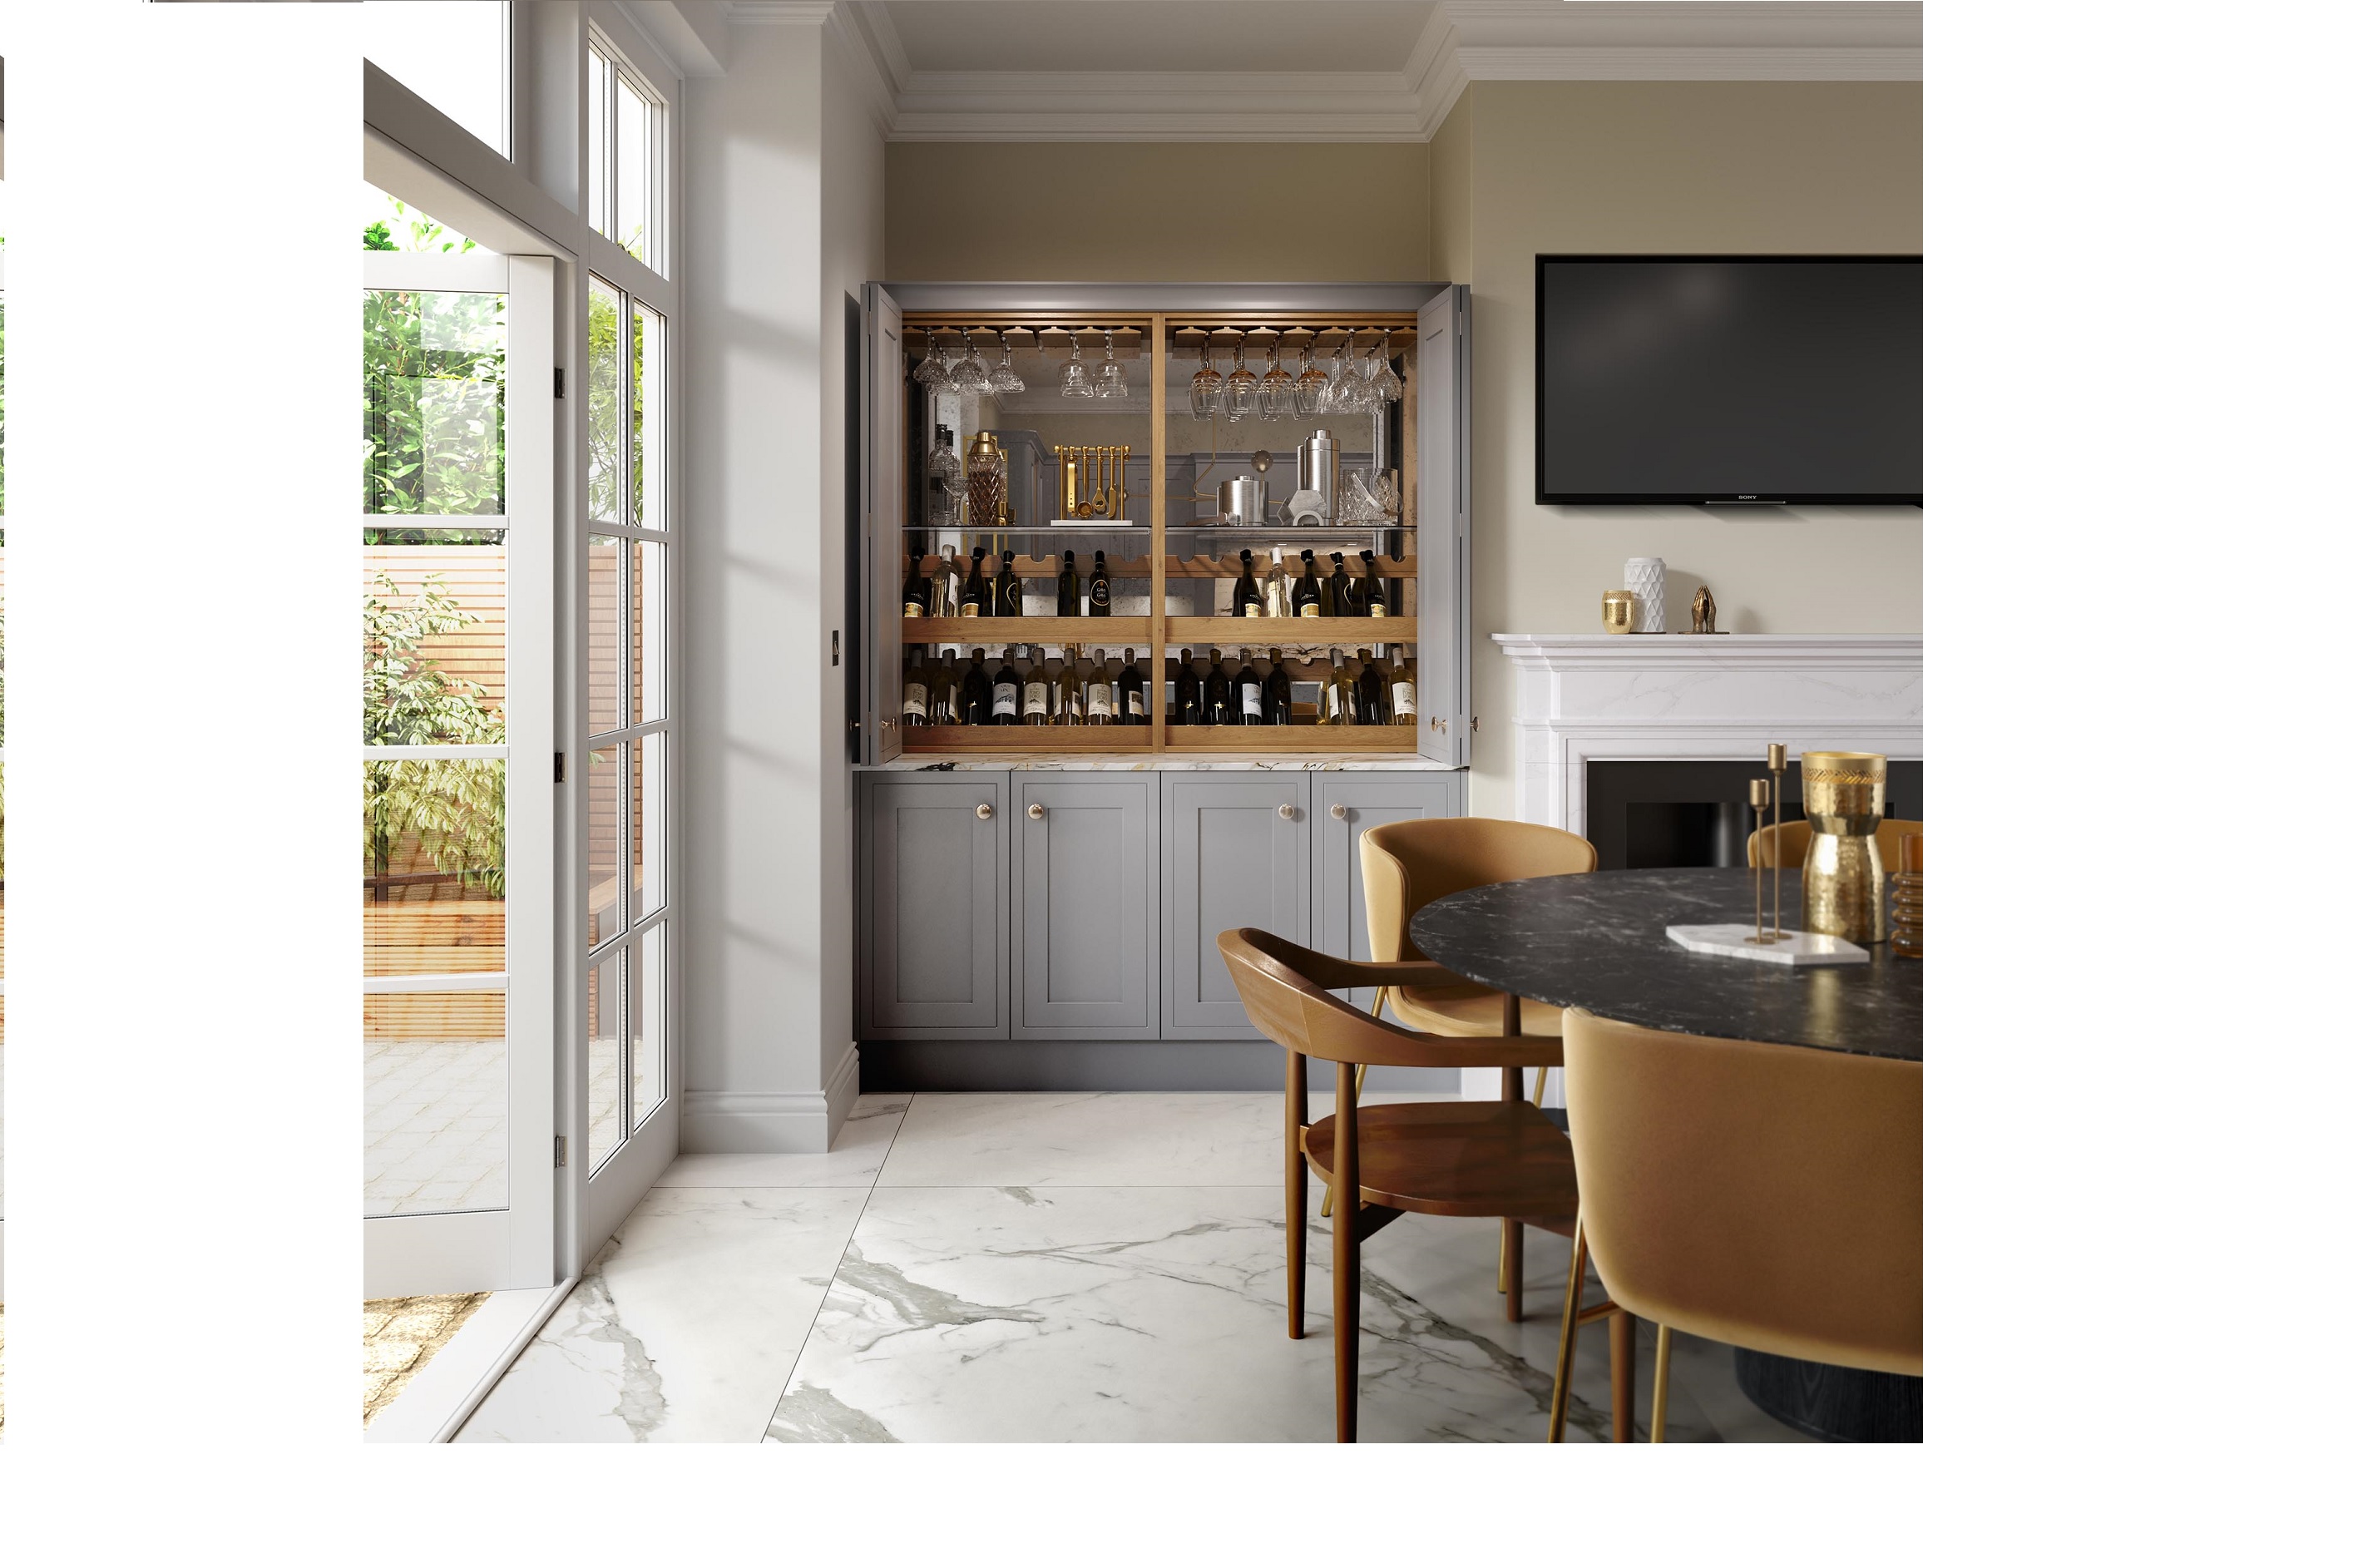 smooth-finish shaker-style kitchen painted dust grey featuring drinks dresser with oak glass holders, wine racks and bi-folding doors